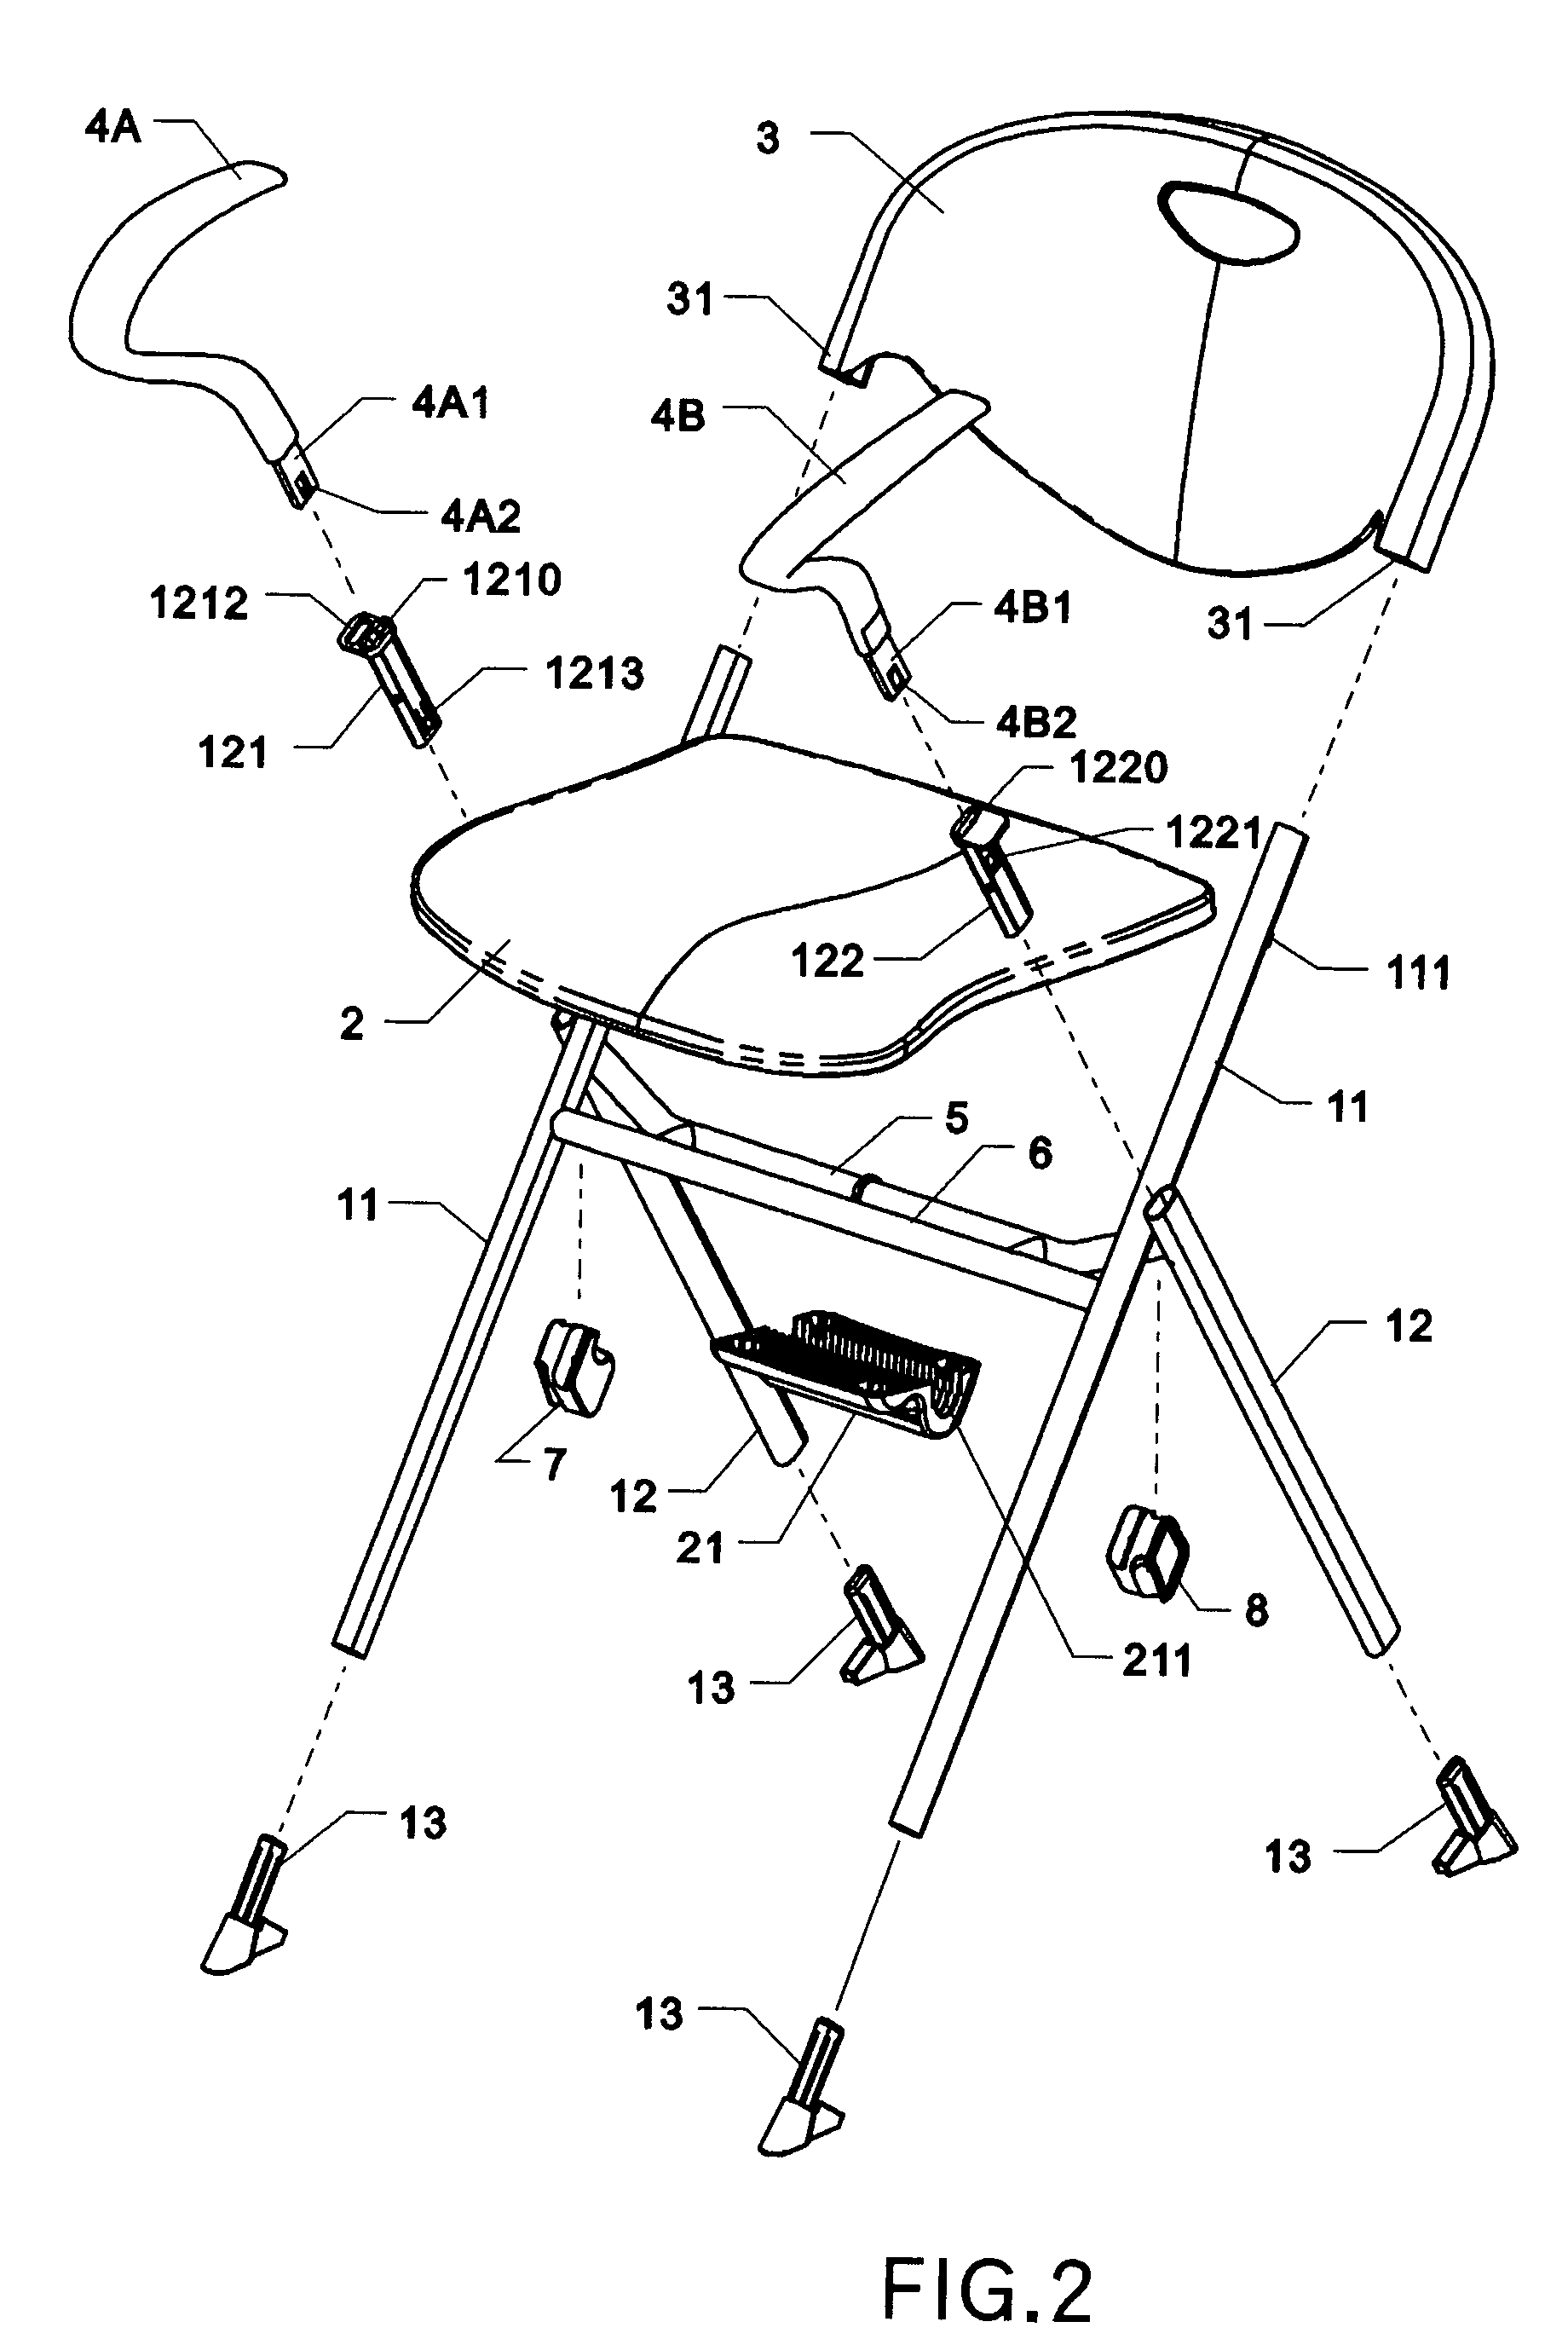 Structure of chair capable of being stacked vertically and horizontally